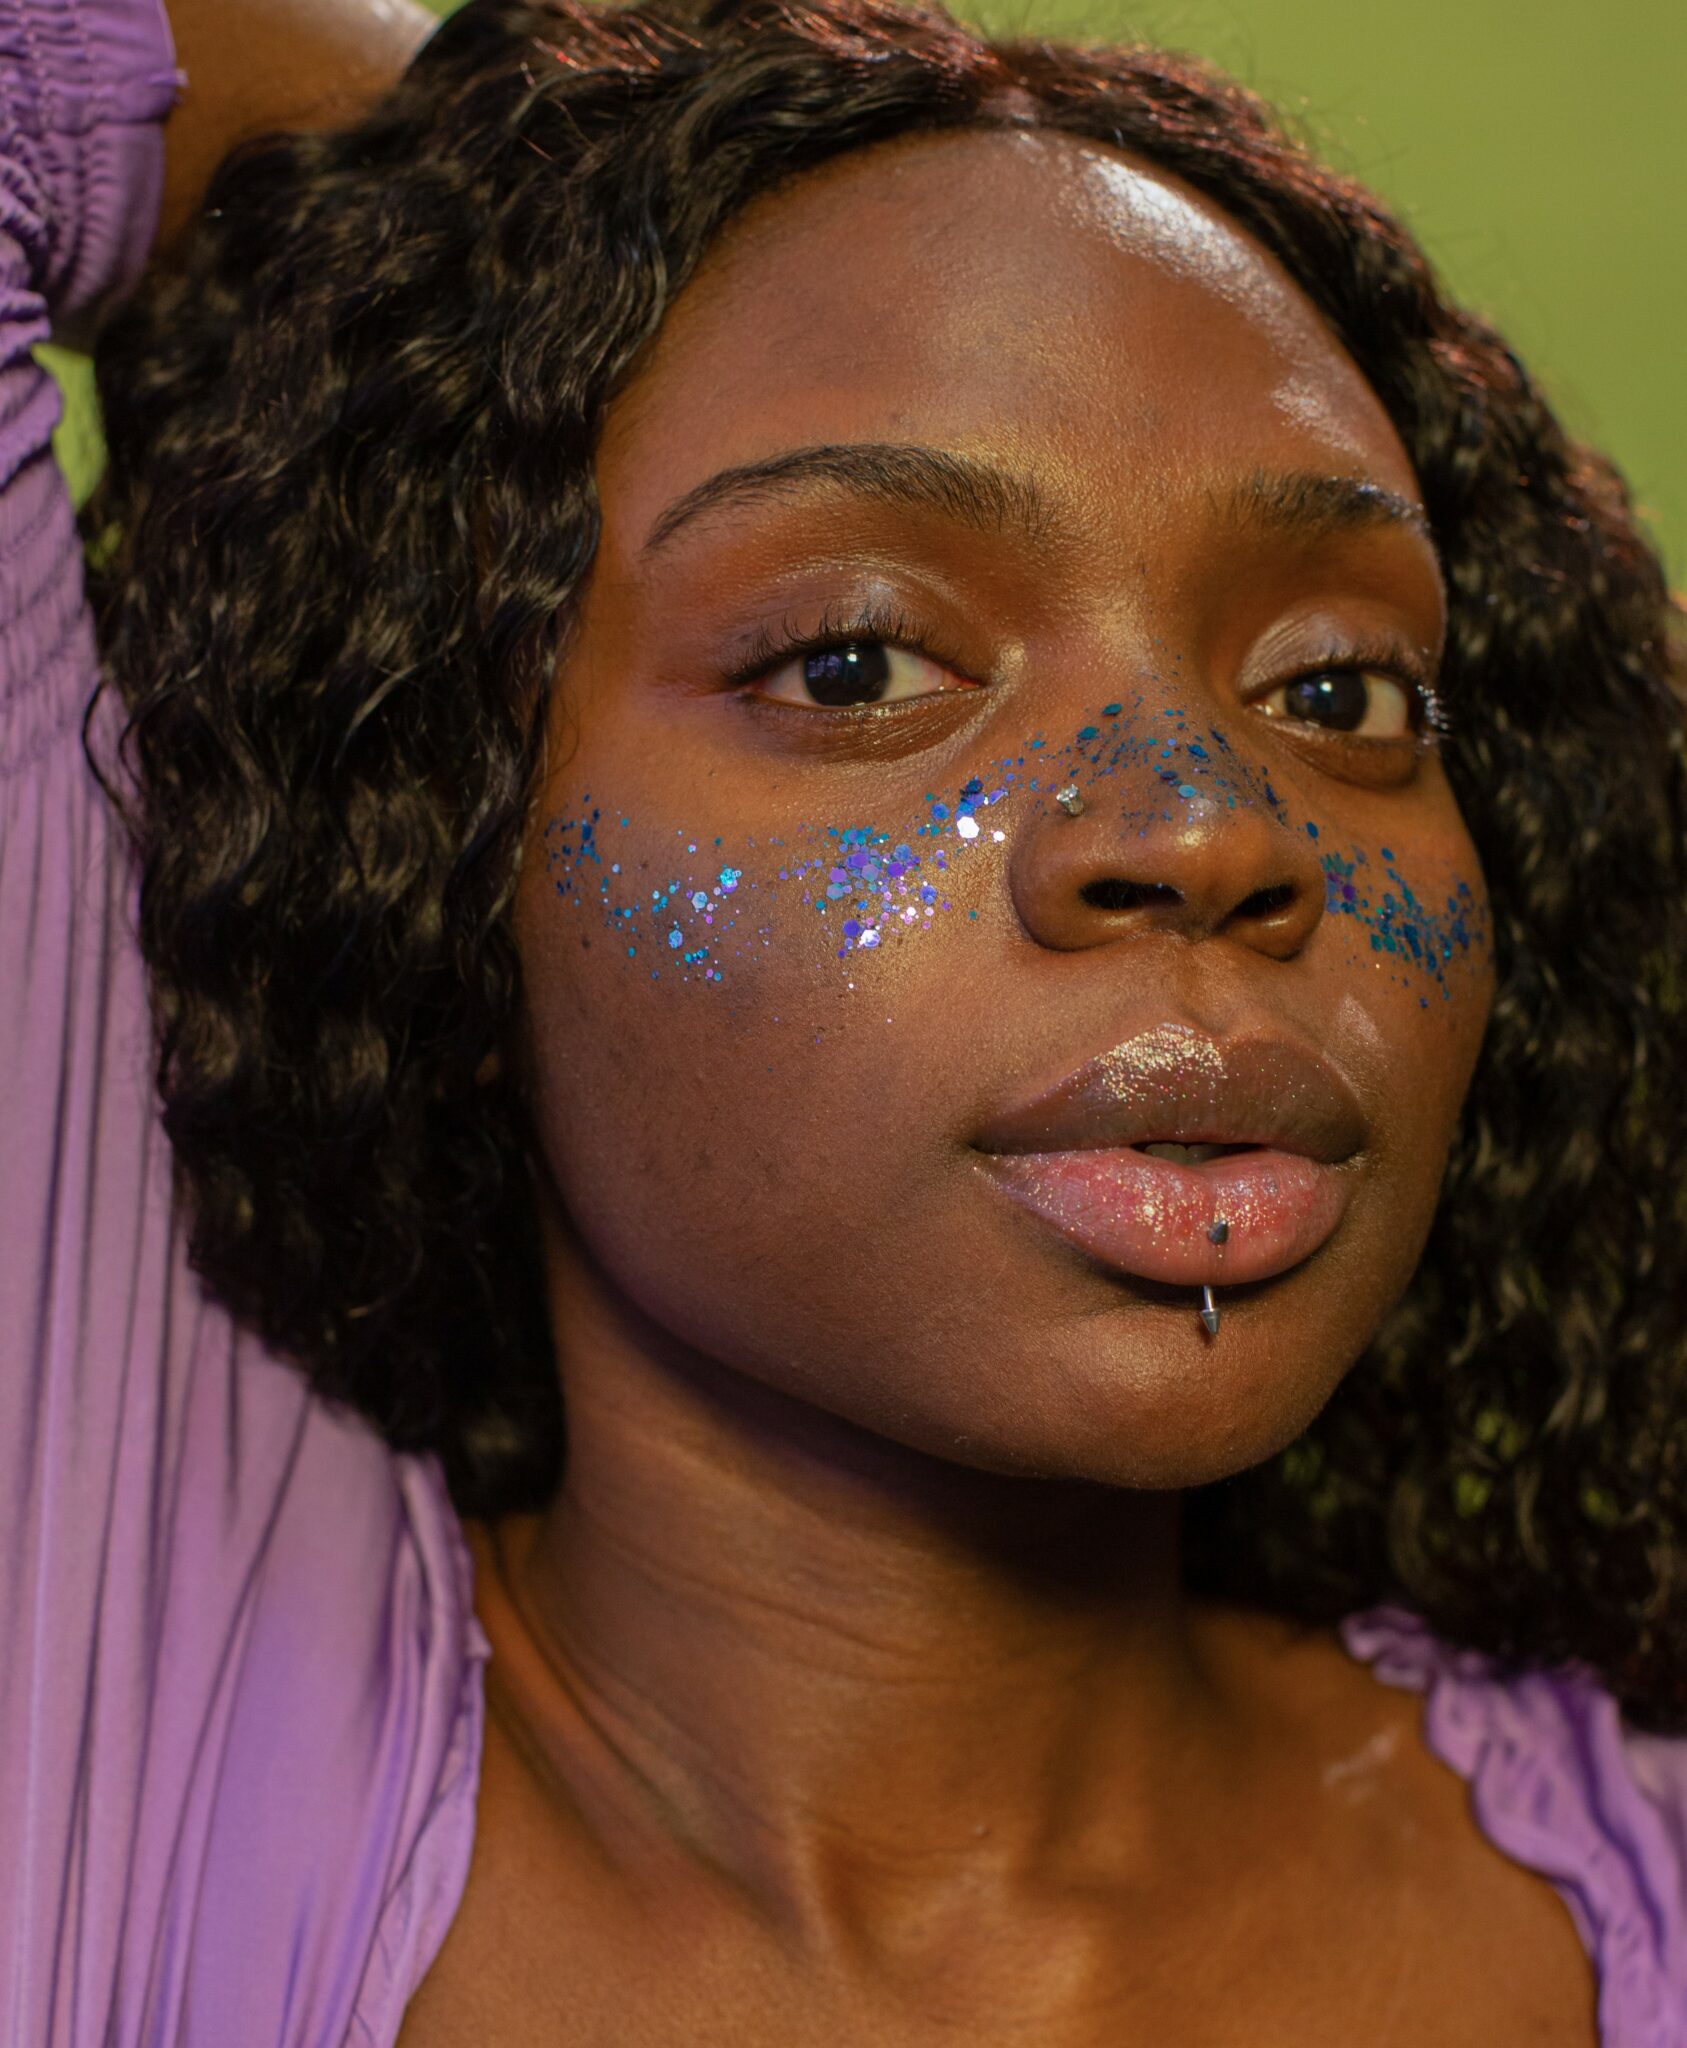 A close-up of a Black woman's face with glitter on her cheekbones.